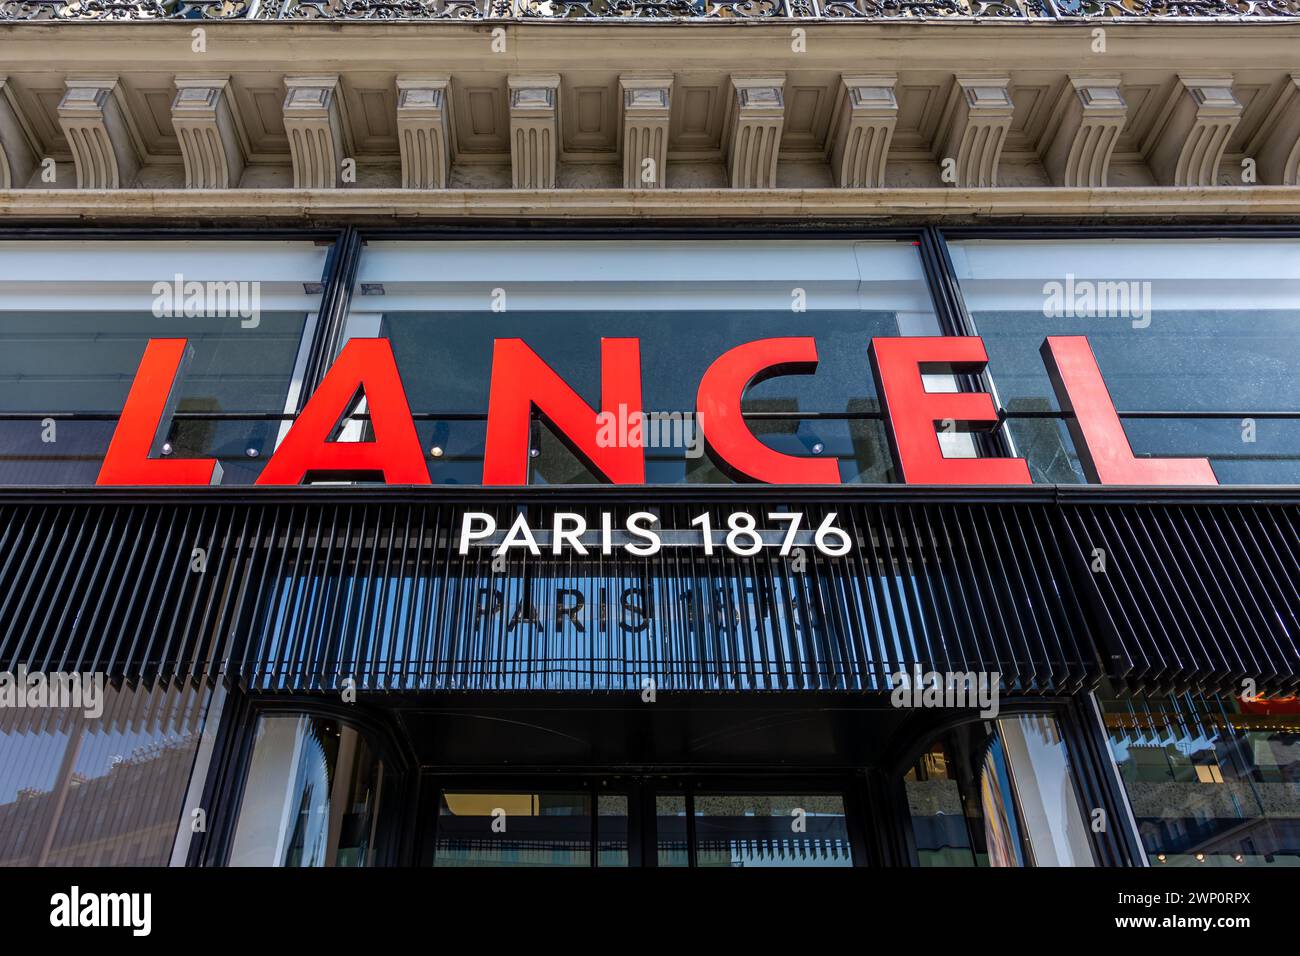 Sign and logo of the main Lancel boutique located Place de l'Opéra in Paris. Lancel is a French leather goods company founded in Paris in 1876 Stock Photo